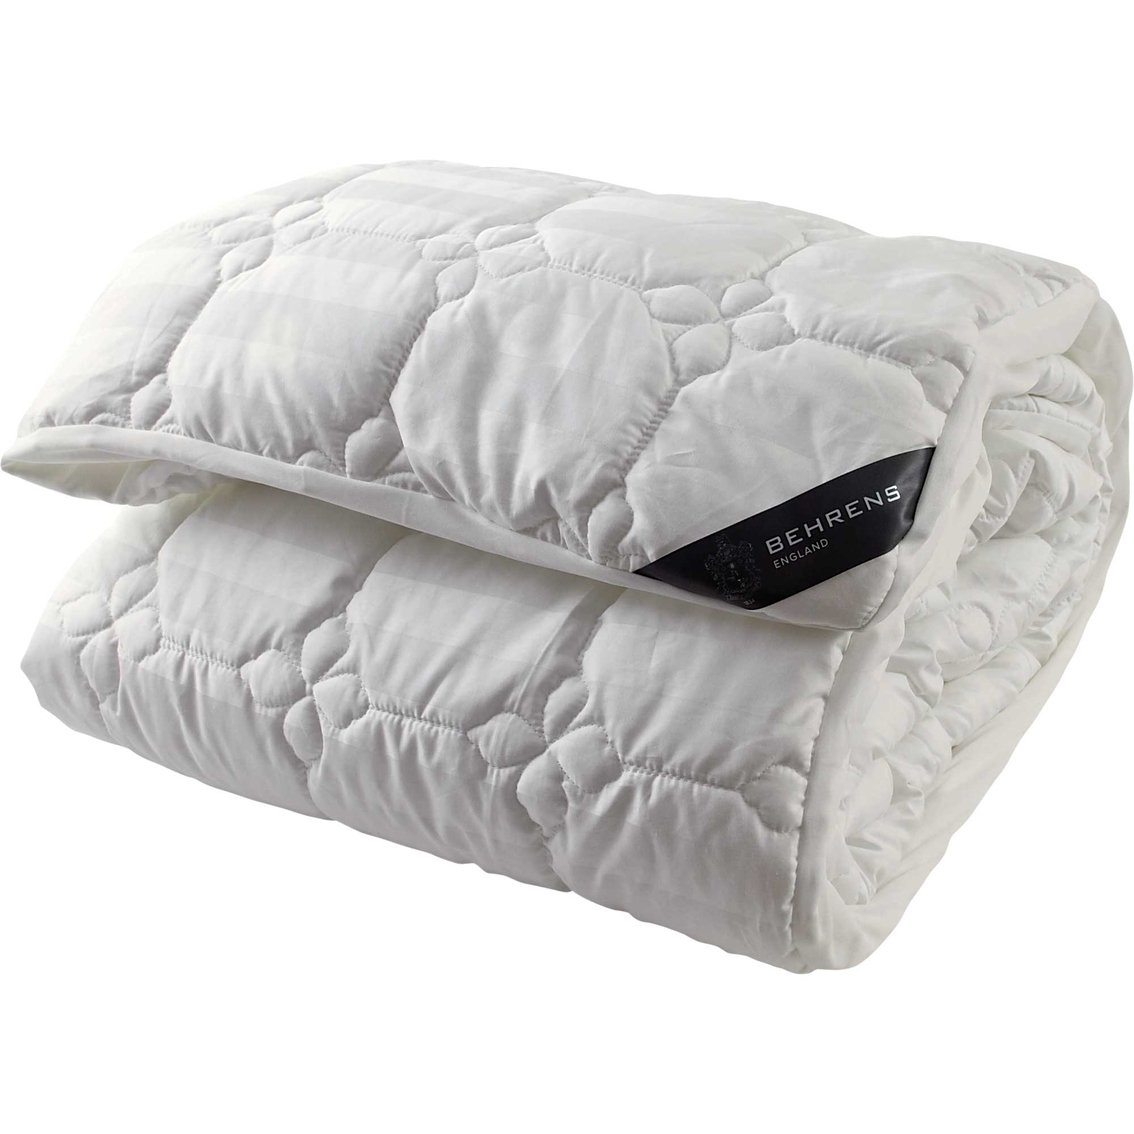 Behrens England Full Protection Mattress Pad - Image 4 of 5